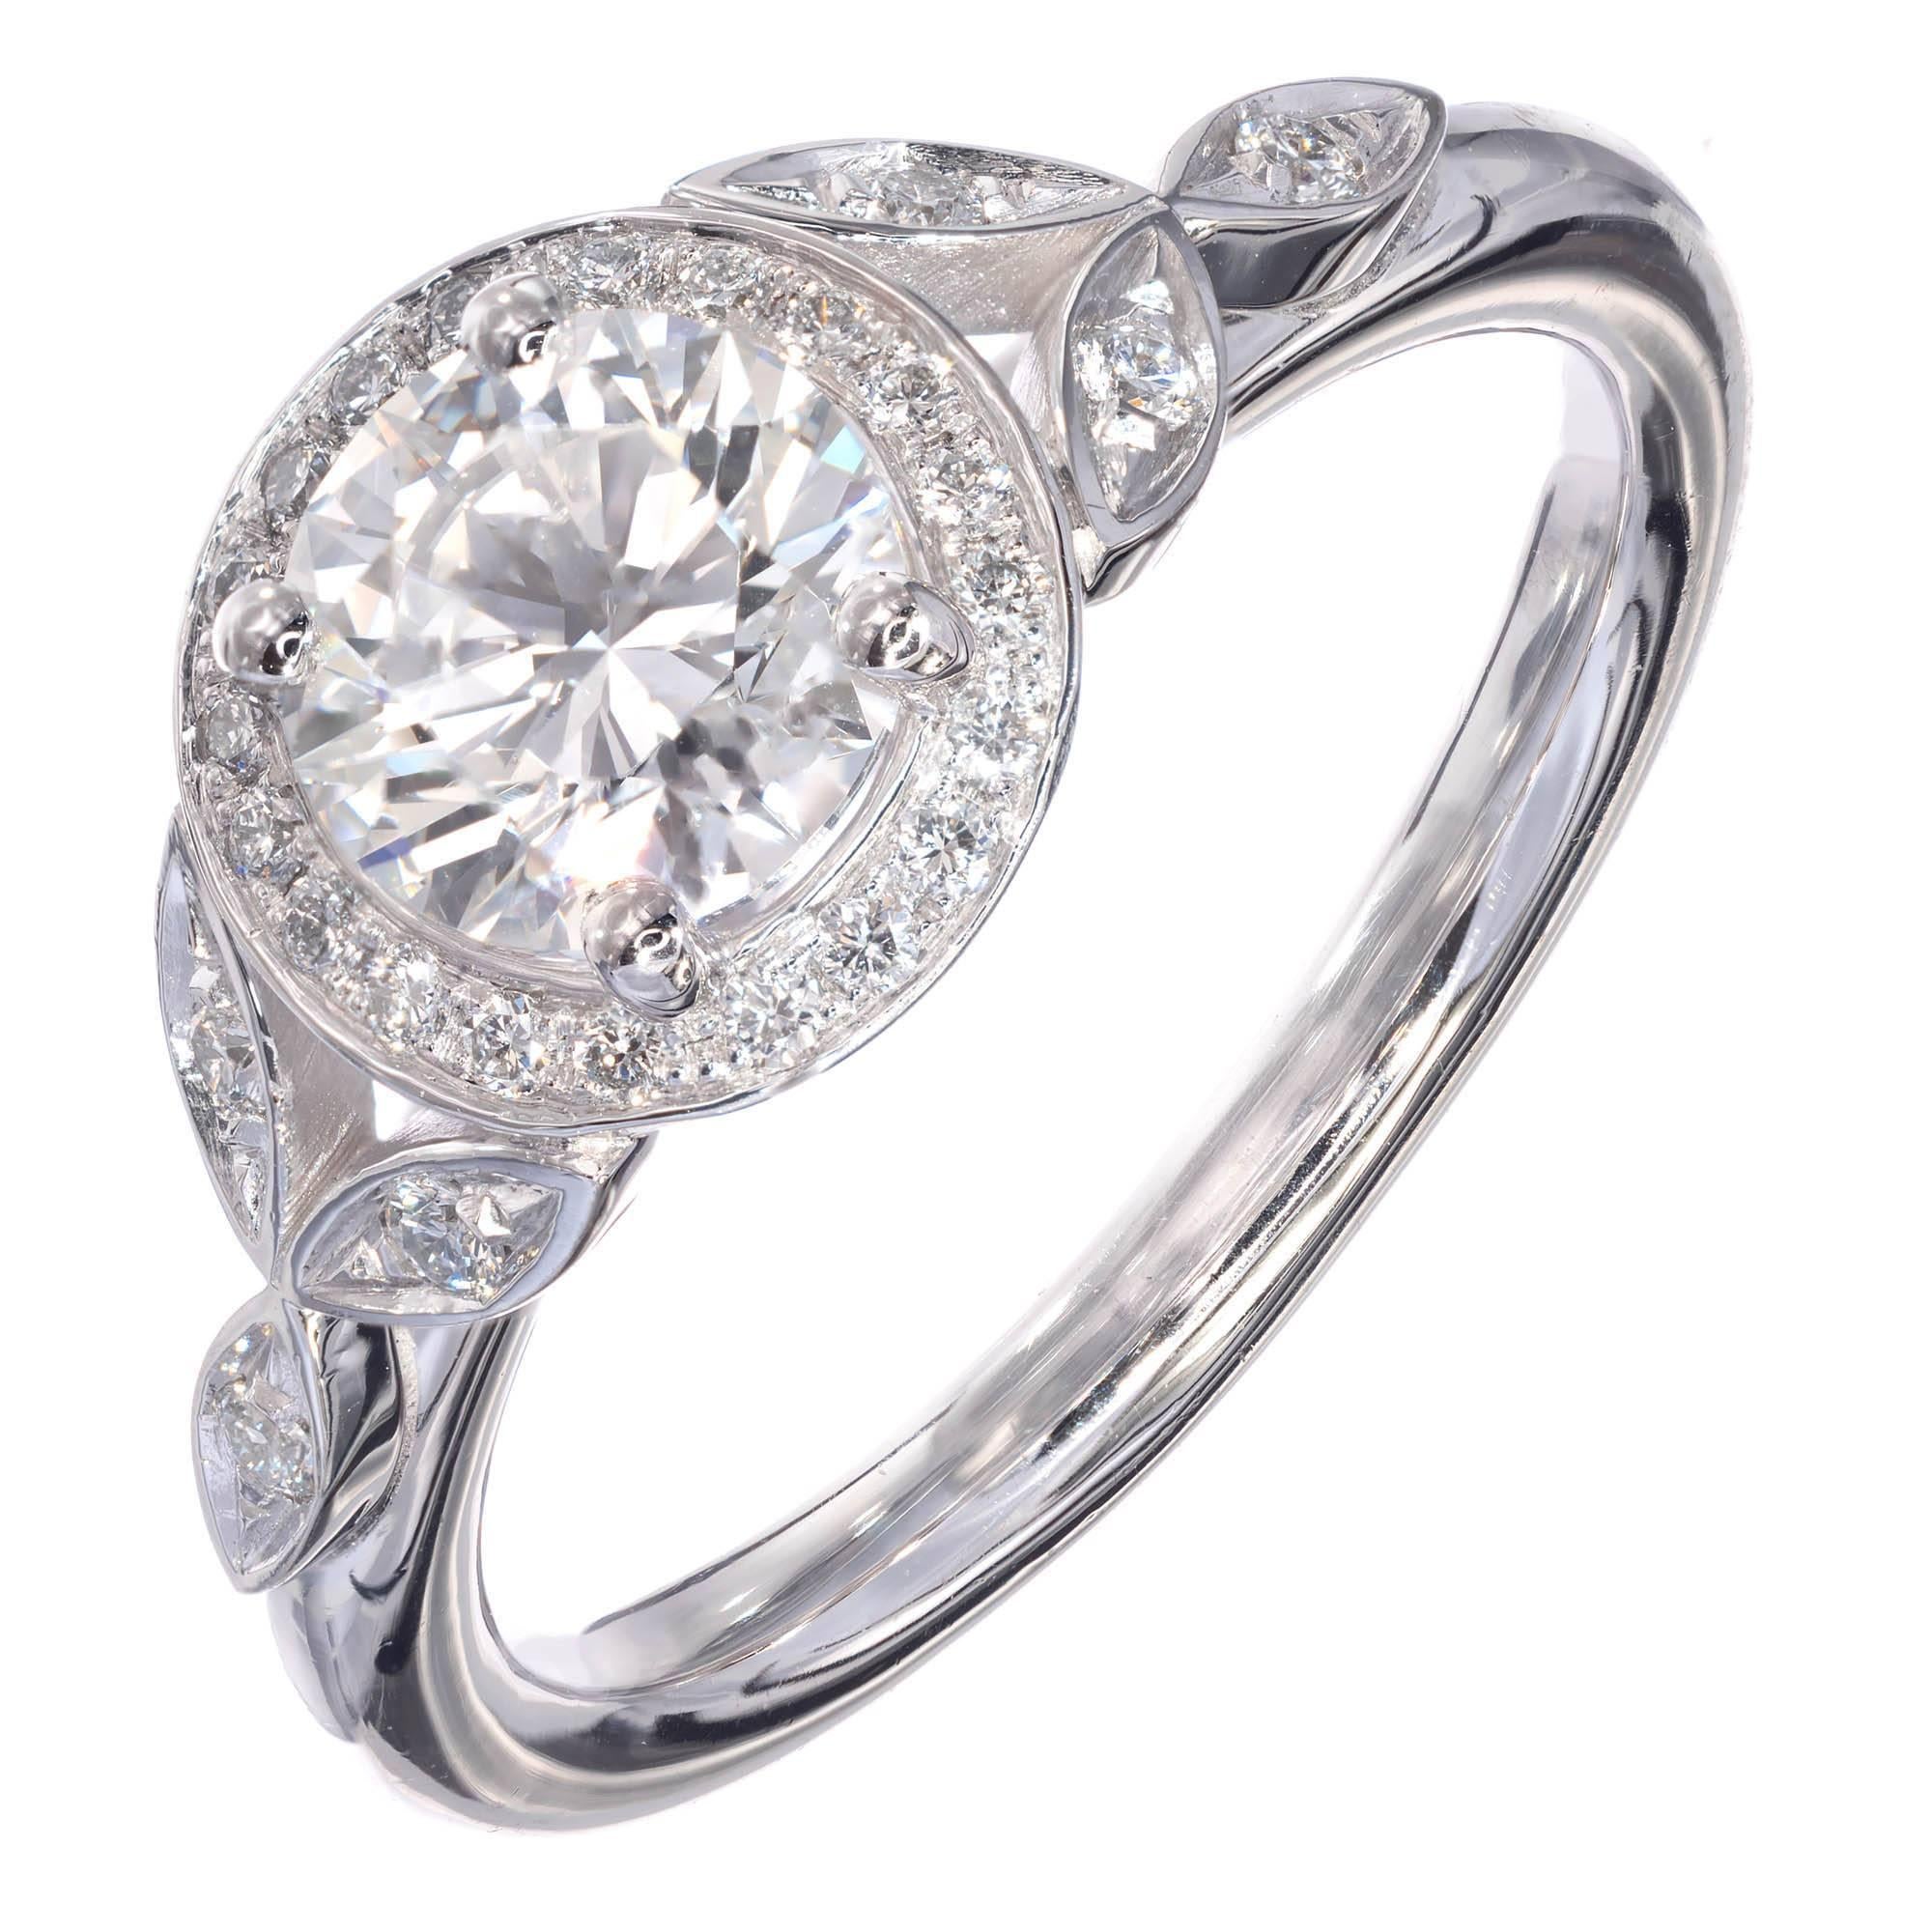 Peter Suchy original design Diamond halo engagement ring with Vintage Inspired design. GIA certified center round brilliant cut Diamond, extra bright and sparkly in a simple classic platinum setting. Designed to fit flush against a wedding band.